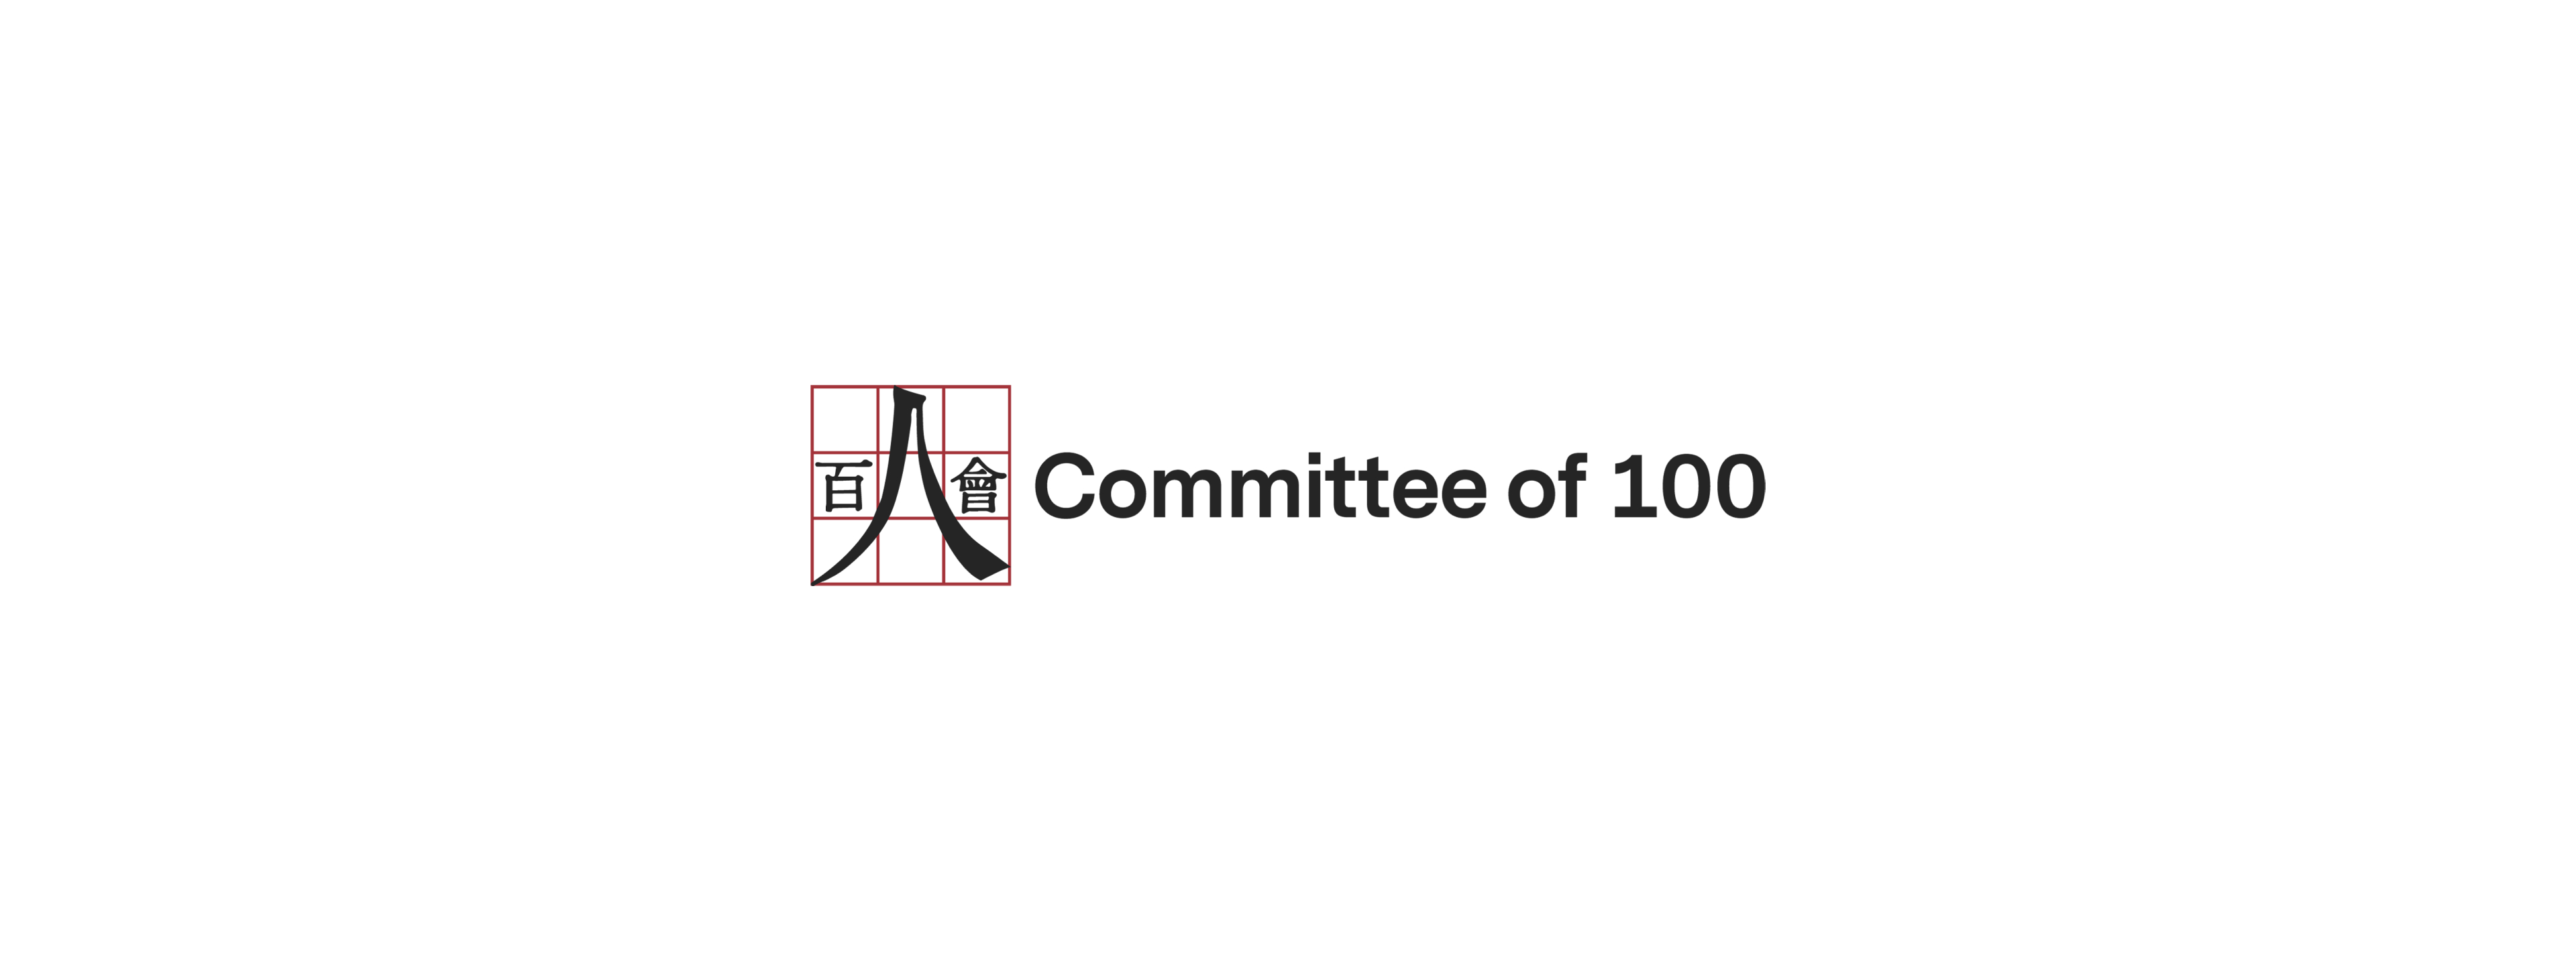 Committee of 100 Issues Letter of Support in Peter Liang Case and Urges Chinese American Community to Engage in Constructive Action